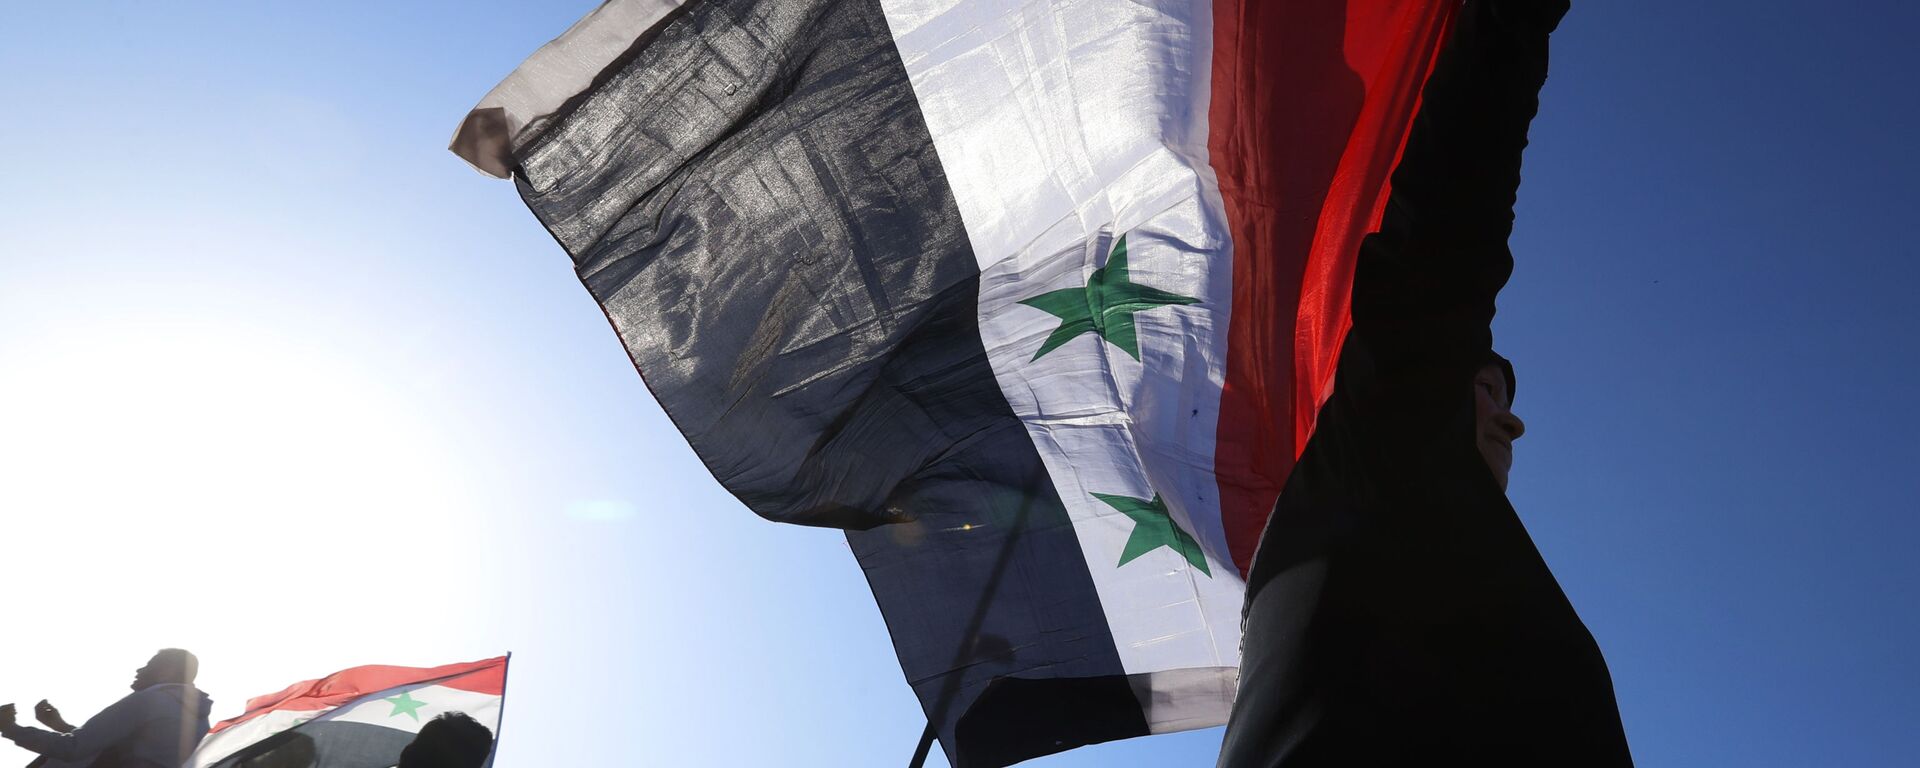 A Syrian government supporter holds up a Syrian national flag as he chants slogans against U.S. President Trump during demonstrations following a wave of U.S., British and French military strikes to punish President Bashar Assad for suspected chemical attack against civilians, in Damascus, Syria, Saturday, April 14, 2018 - Sputnik International, 1920, 23.09.2021